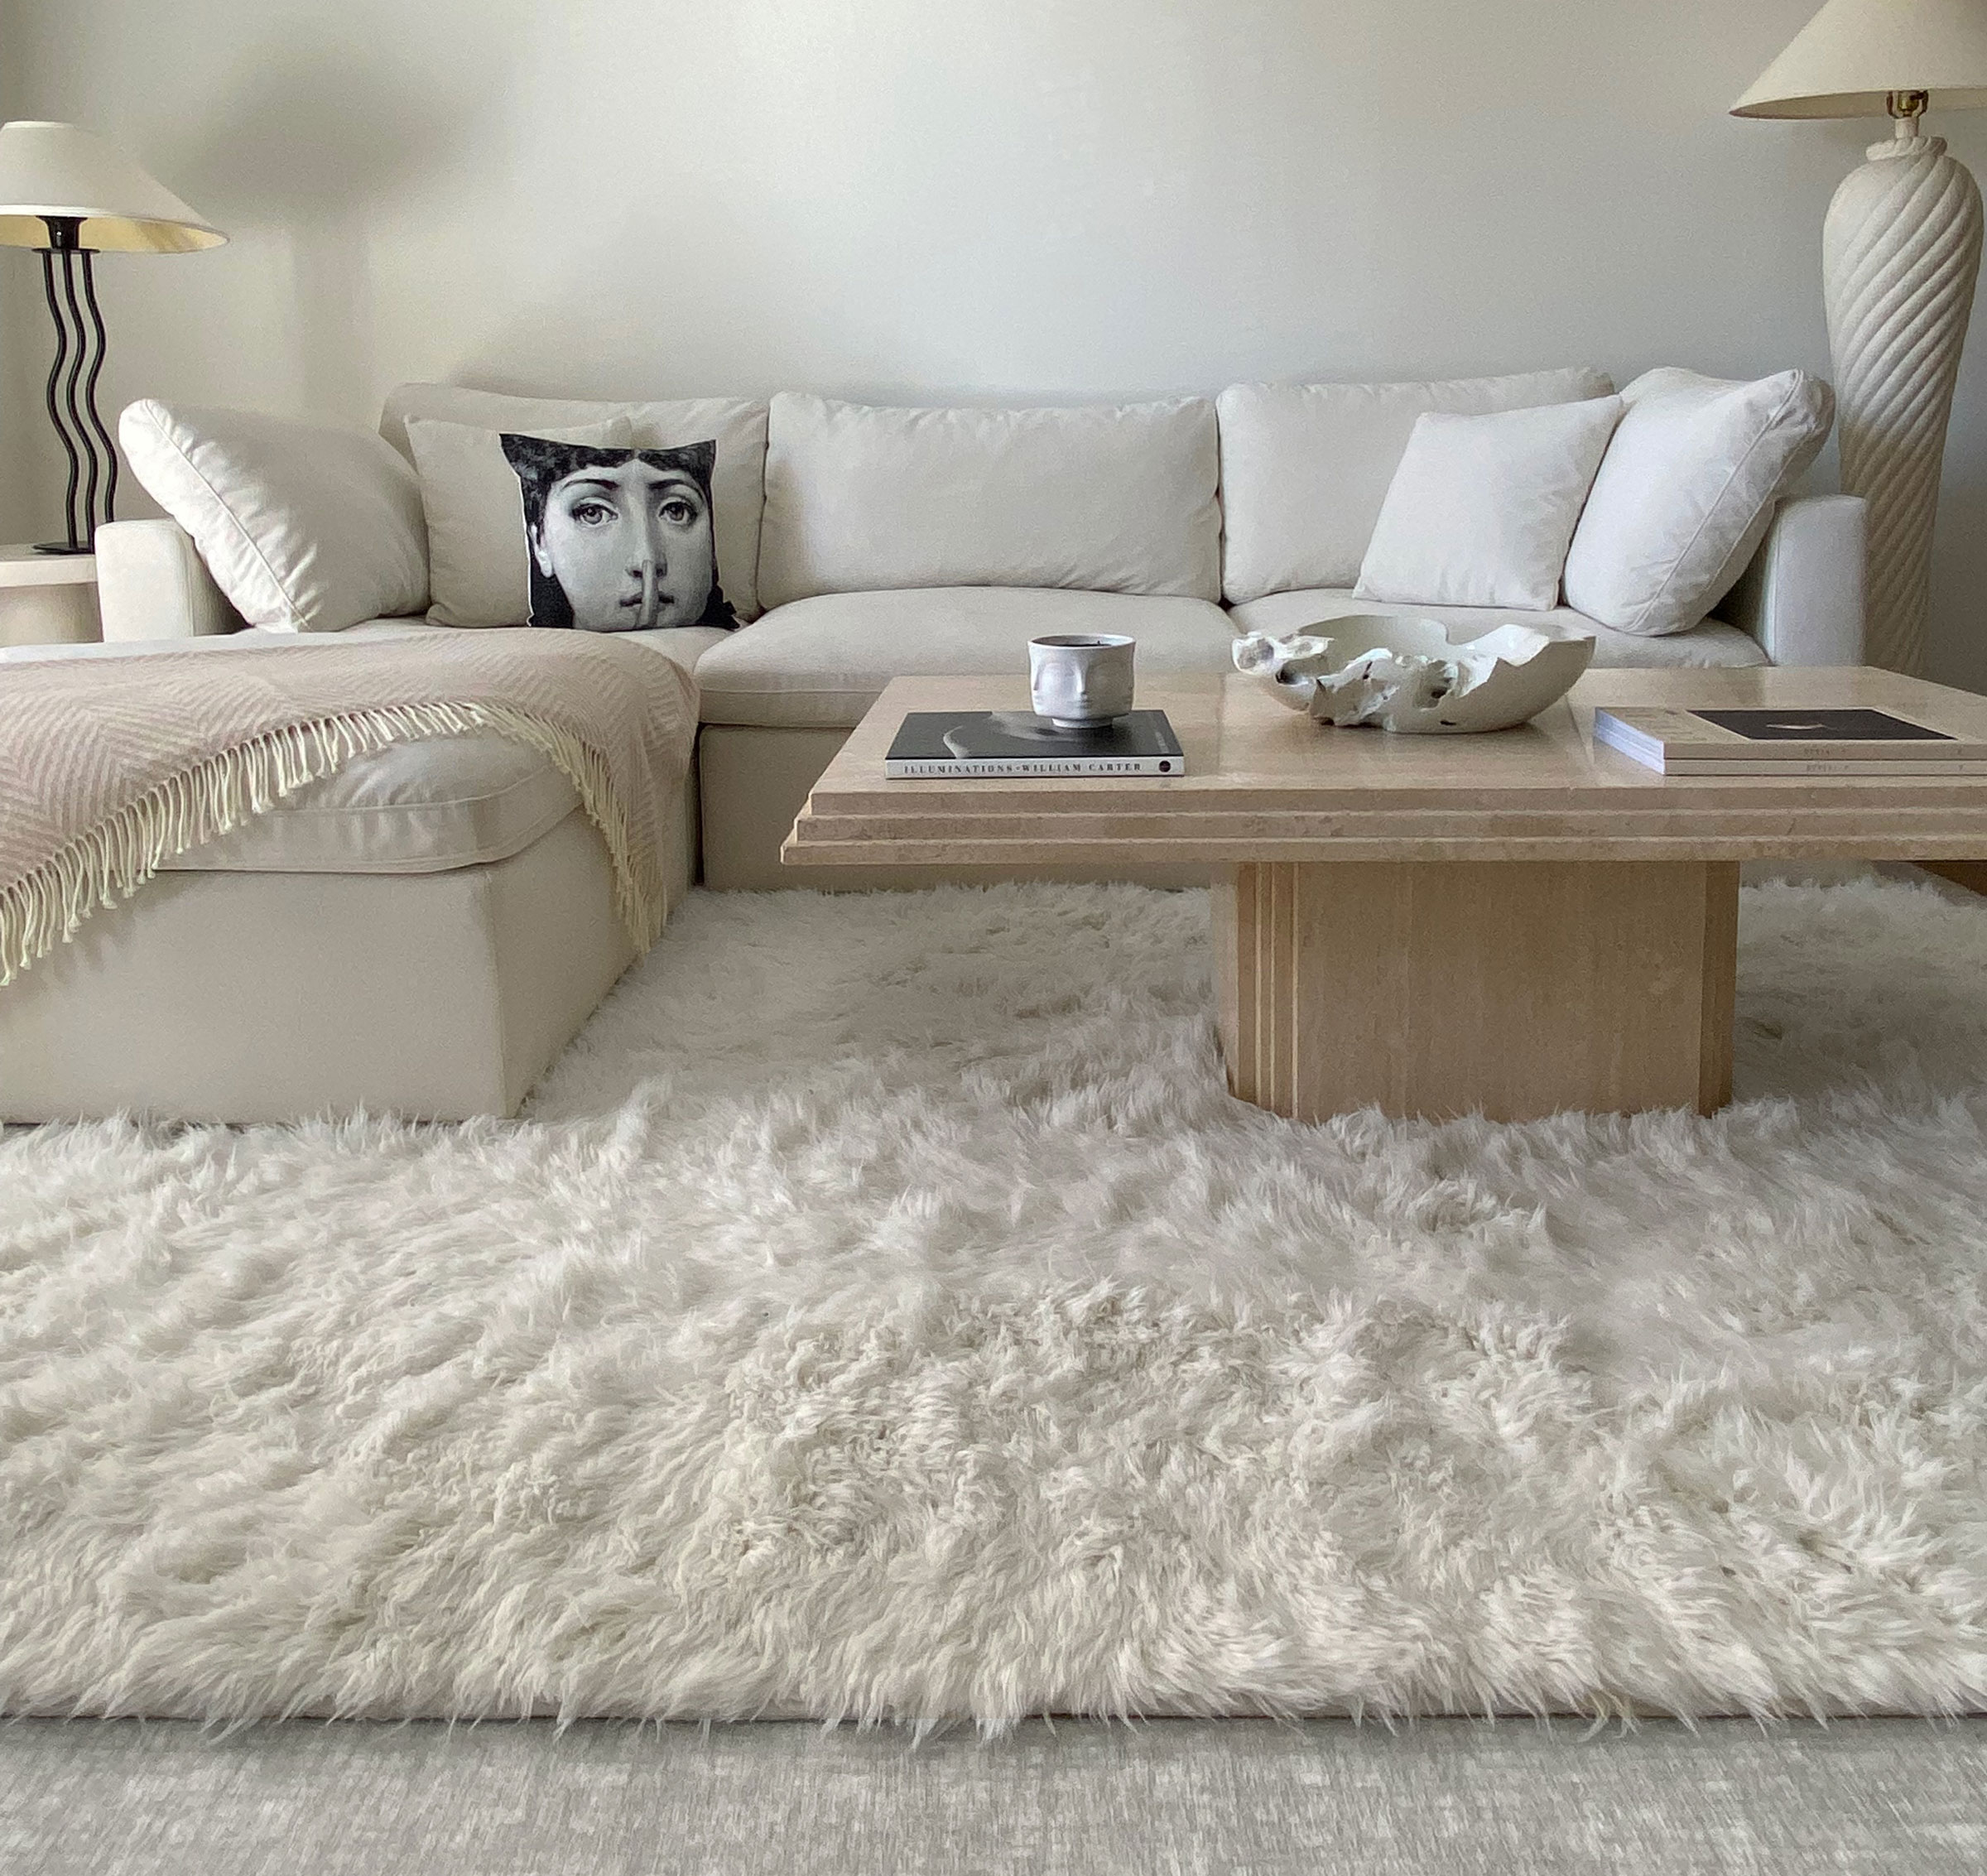 Predecir disculpa Observatorio How to cover carpet in a rental: 7 clever ways | Real Homes